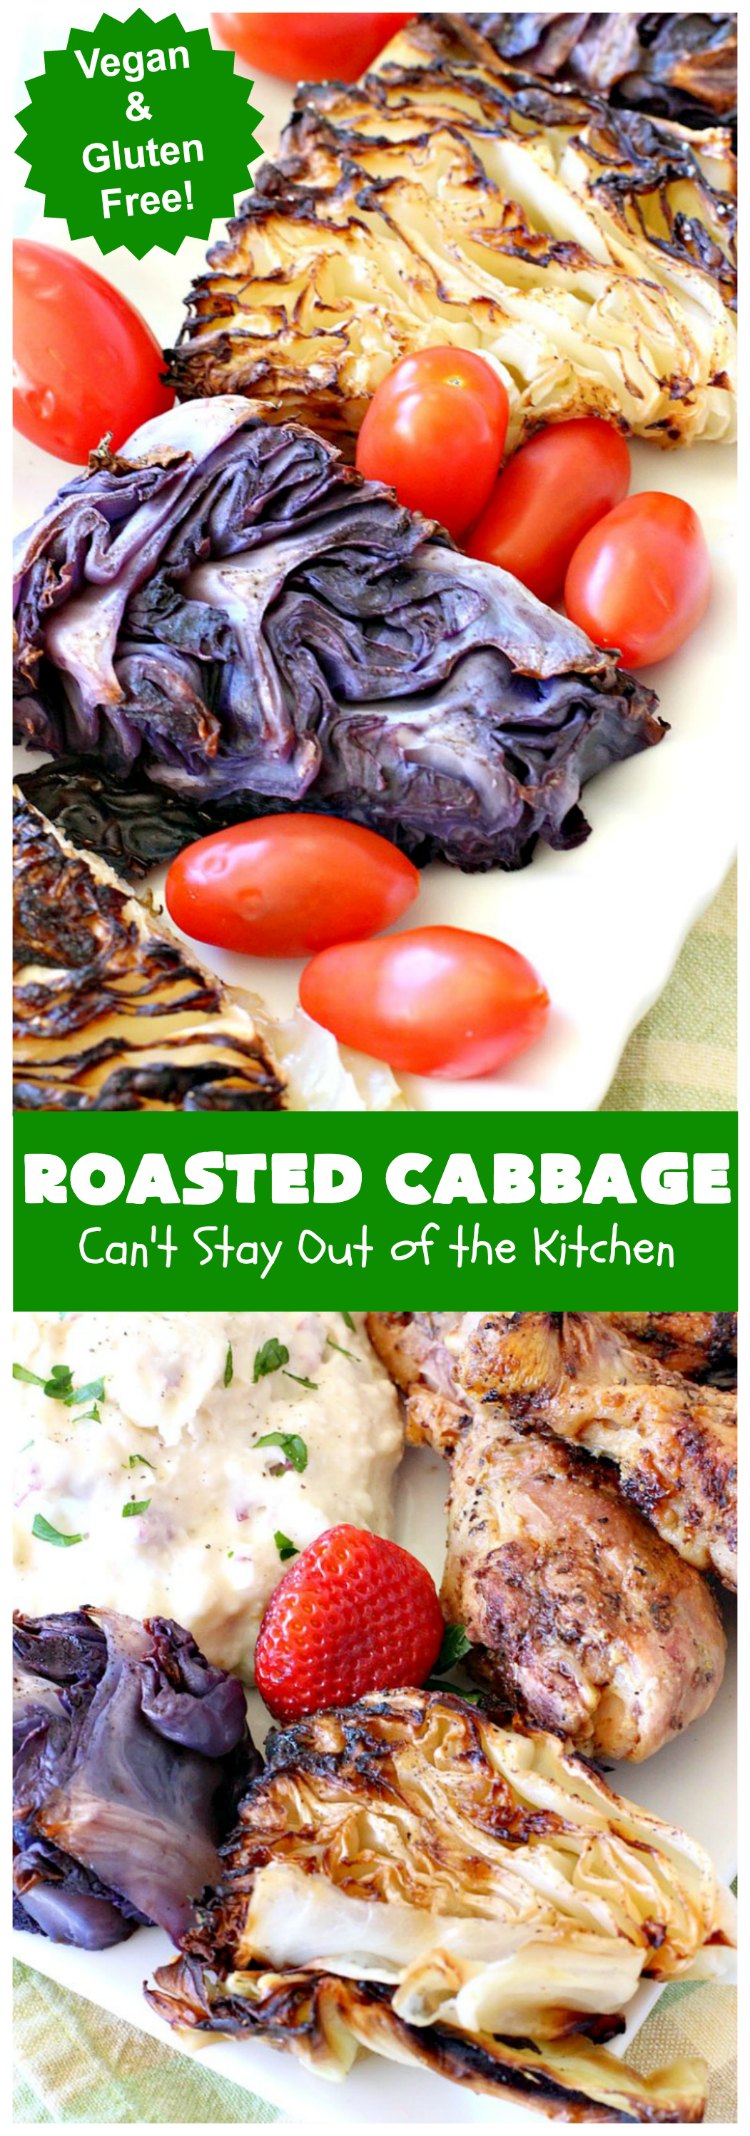 Roasted Cabbage | Can't Stay Out of the Kitchen | this delicious 4 ingredient #SideDish is so easy & a delightful way to serve #cabbage. #Healthy #Vegan #GlutenFree #LowCalorie #Vegetable #RoastedCabbage